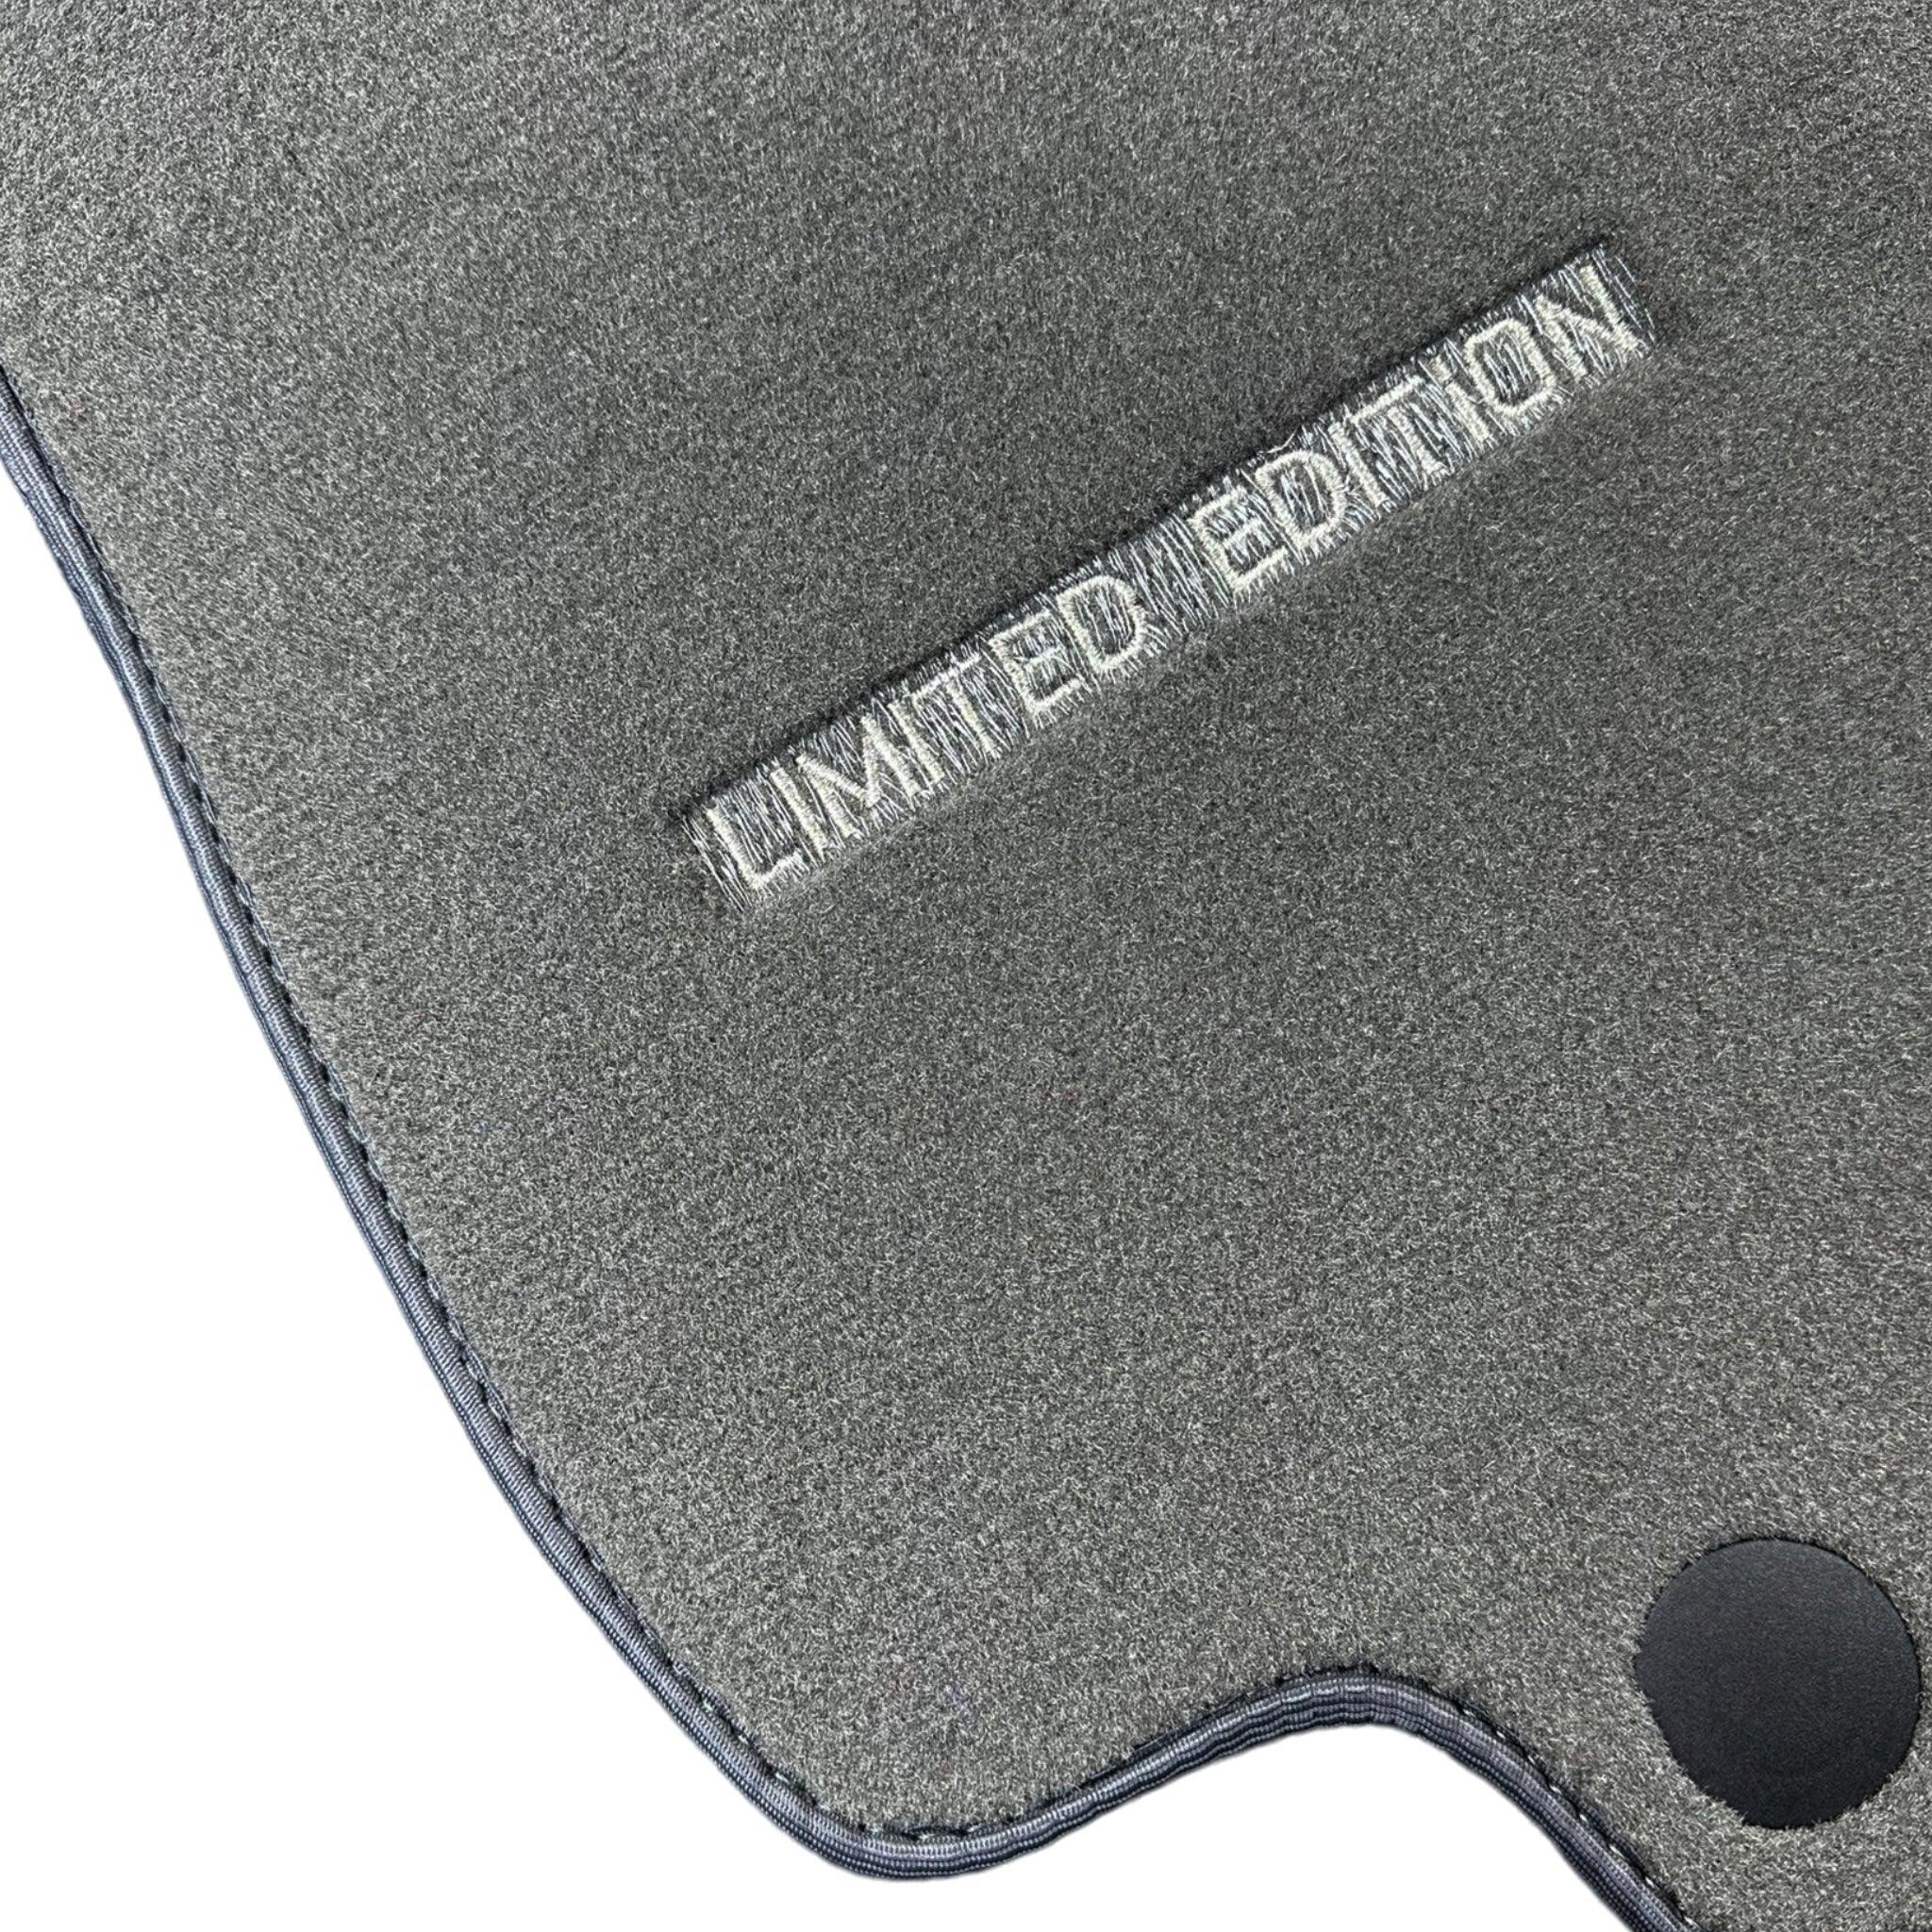 Gray Floor Mats For Mercedes Benz GLC-Class X253 SUV (2015-2019) | Limited Edition